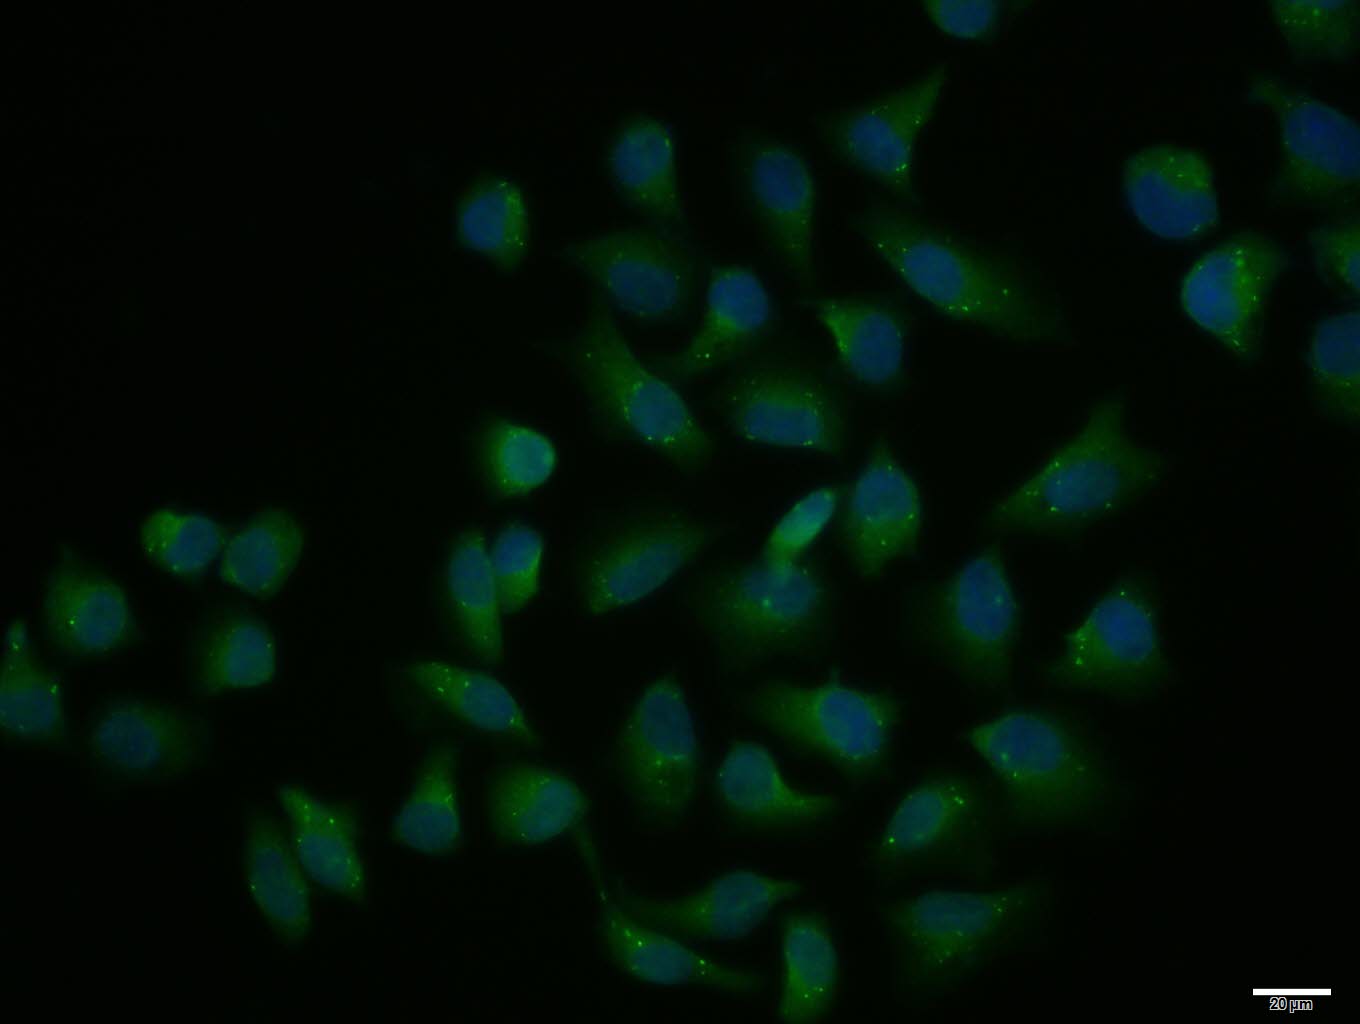 Hela cell; 4% Paraformaldehyde-fixed; Triton X-100 at room temperature for 20 min; Blocking buffer (normal goat serum, C-0005) at 37\u00b0C for 20 min; Antibody incubation with (GIP) polyclonal Antibody, Unconjugated (bs-0098R) 1:100, 90 minutes at 37\u00b0C; followed by a conjugated Goat Anti-Rabbit IgG antibody at 37\u00b0C for 90 minutes, DAPI (blue, C02-04002) was used to stain the cell nuclei.